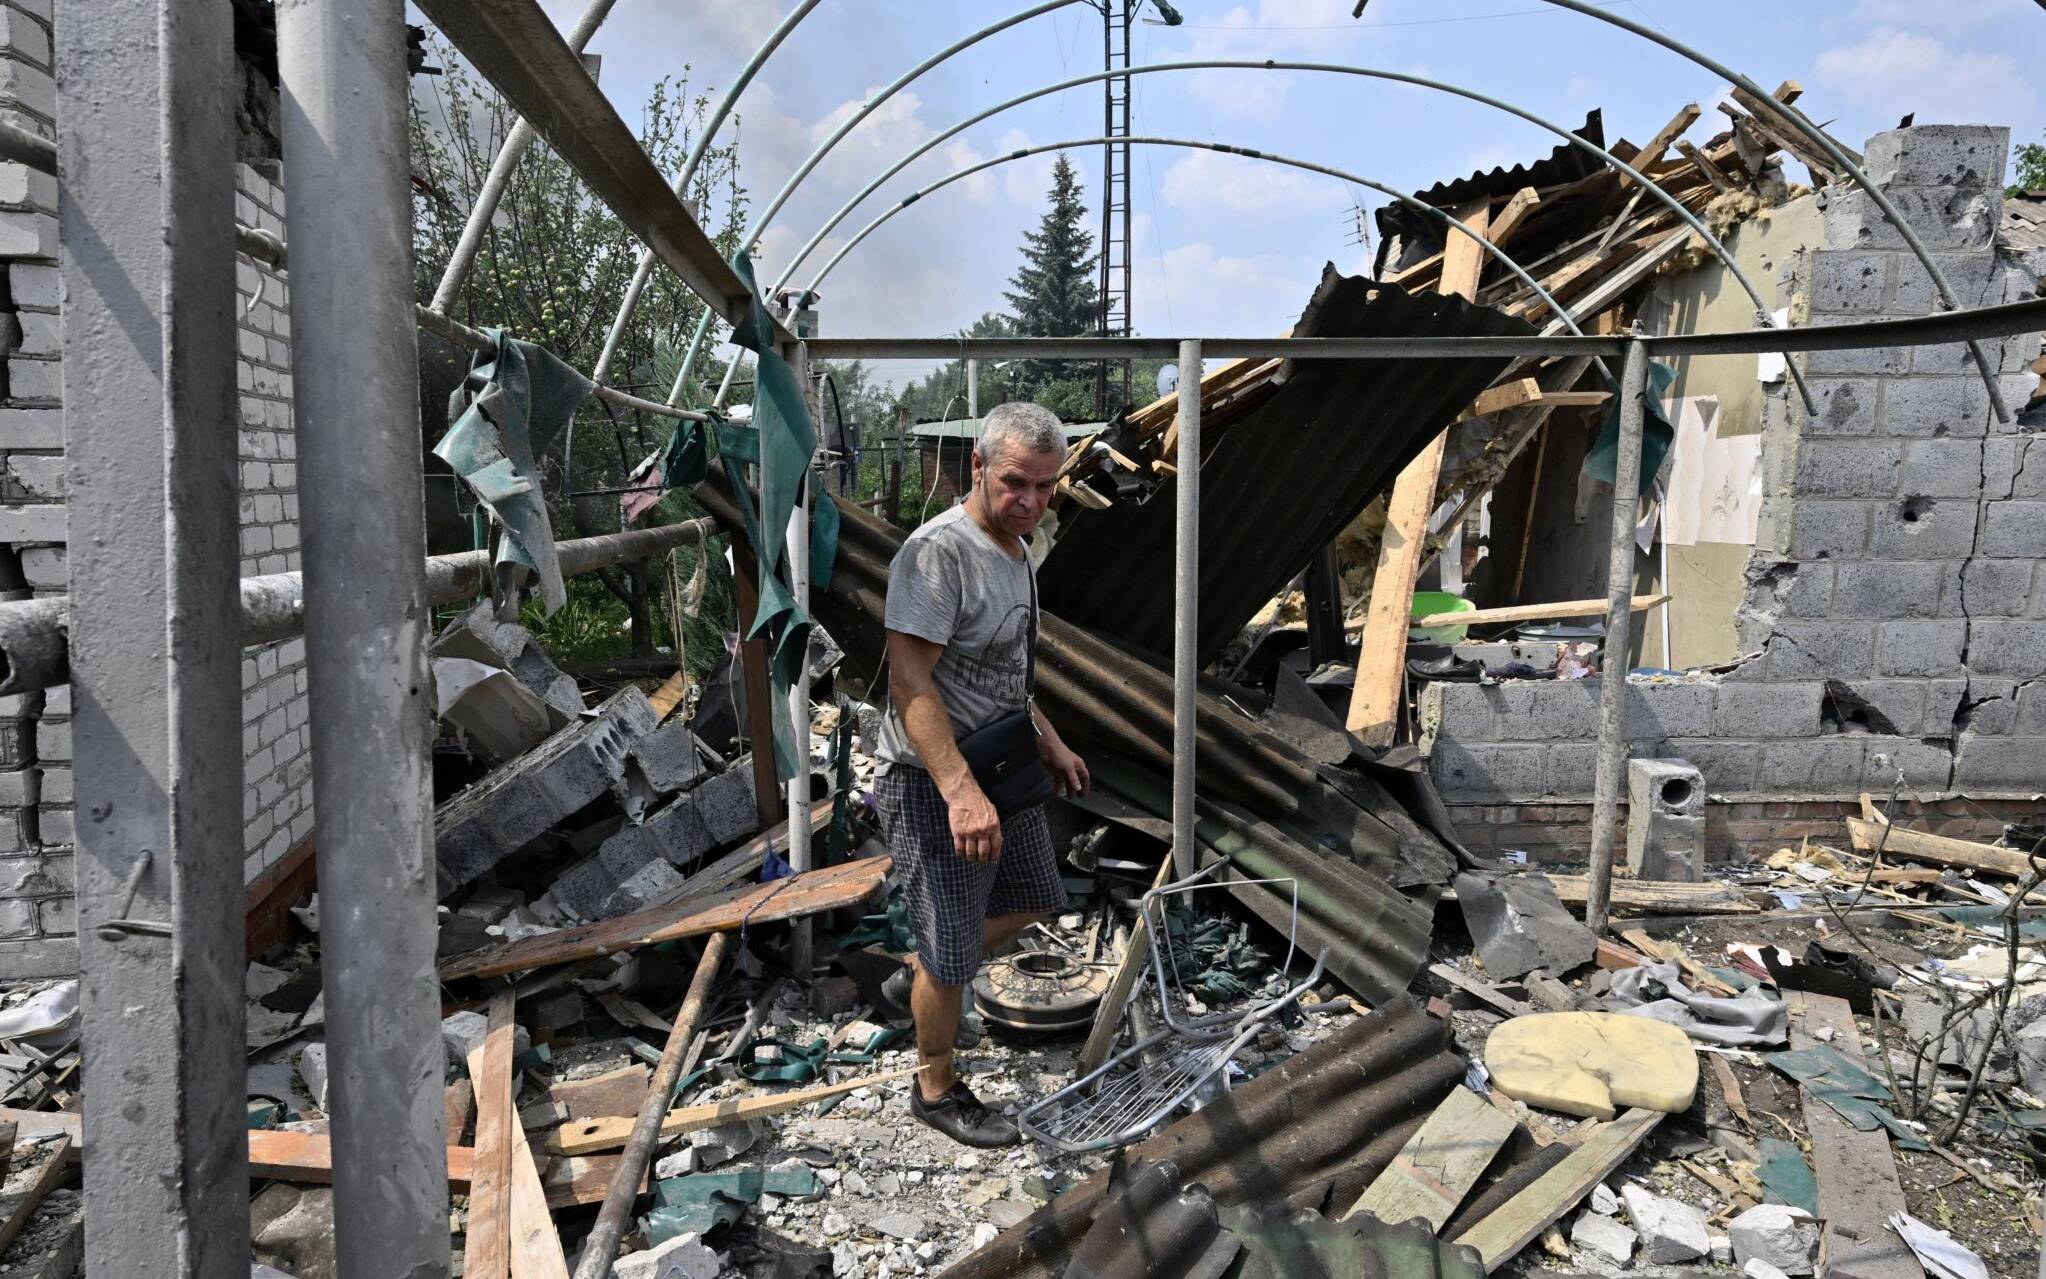 A resident walks among debris next to a destroyed house in Sloviansk on July 4, 2022, the day after a Russian rocket attack. (Photo by Genya SAVILOV / AFP)